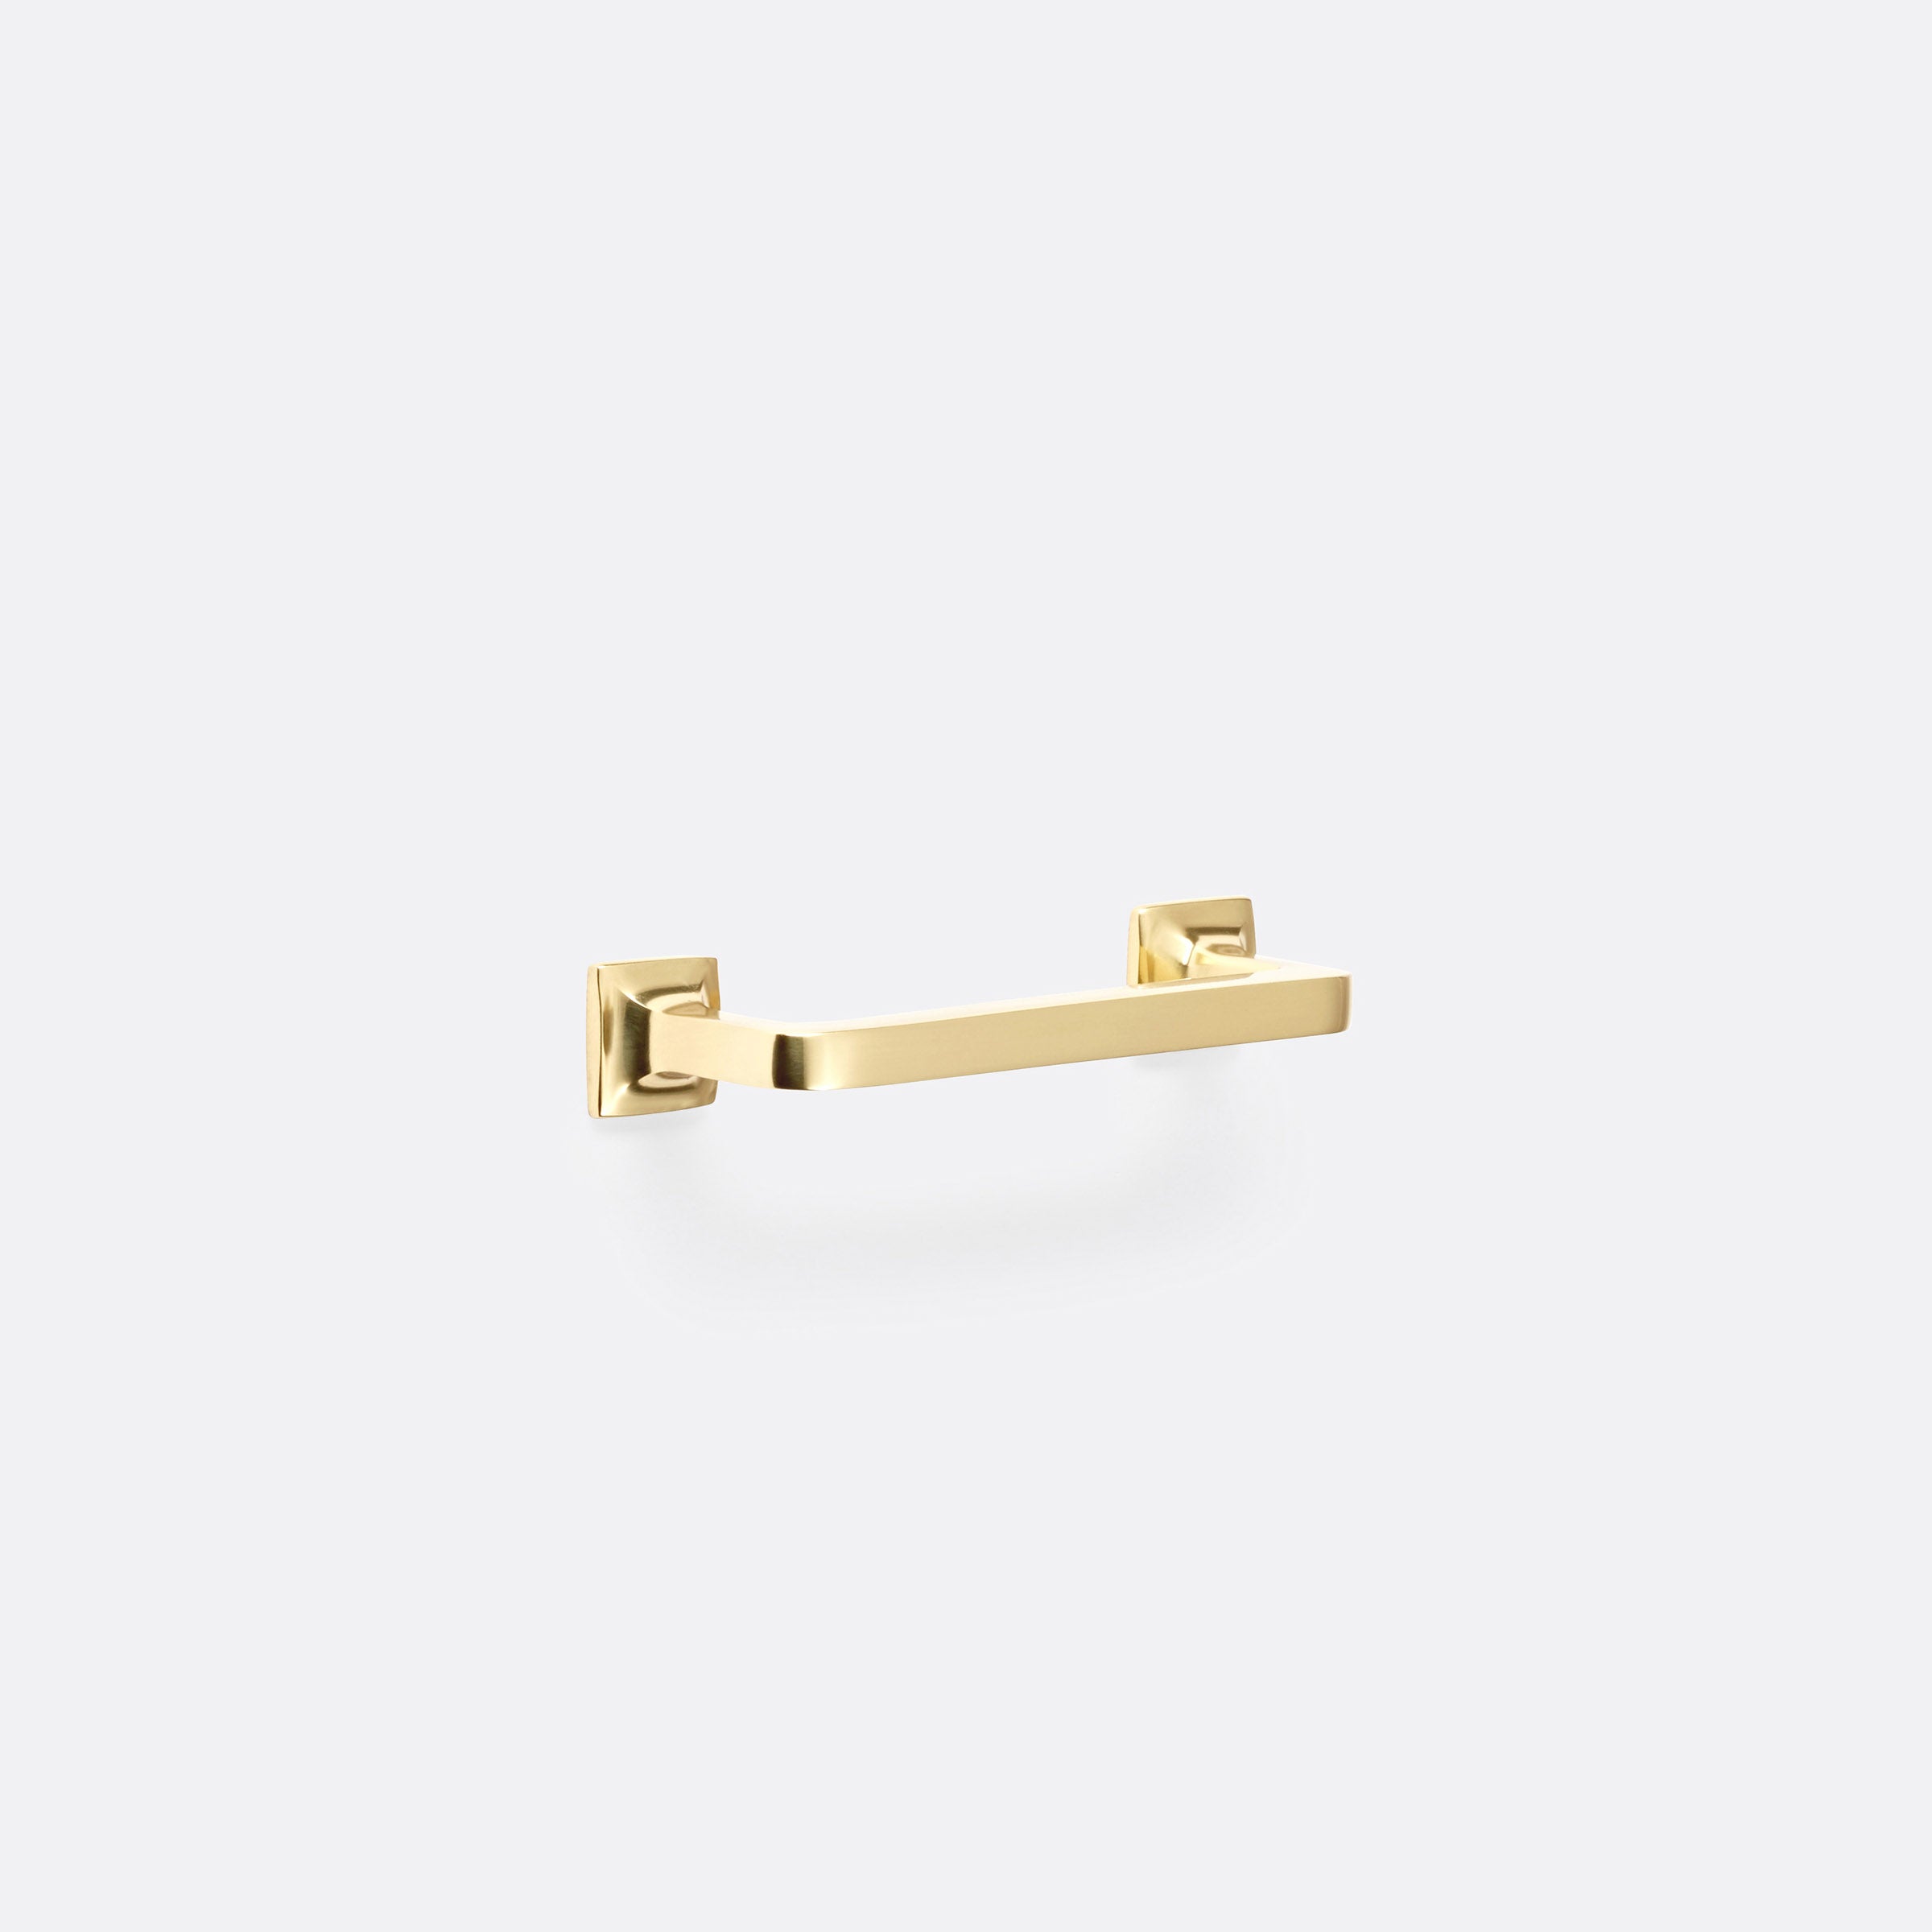 Mission Drawer Pull by Rejuvenation 3" / Unlacquered Brass